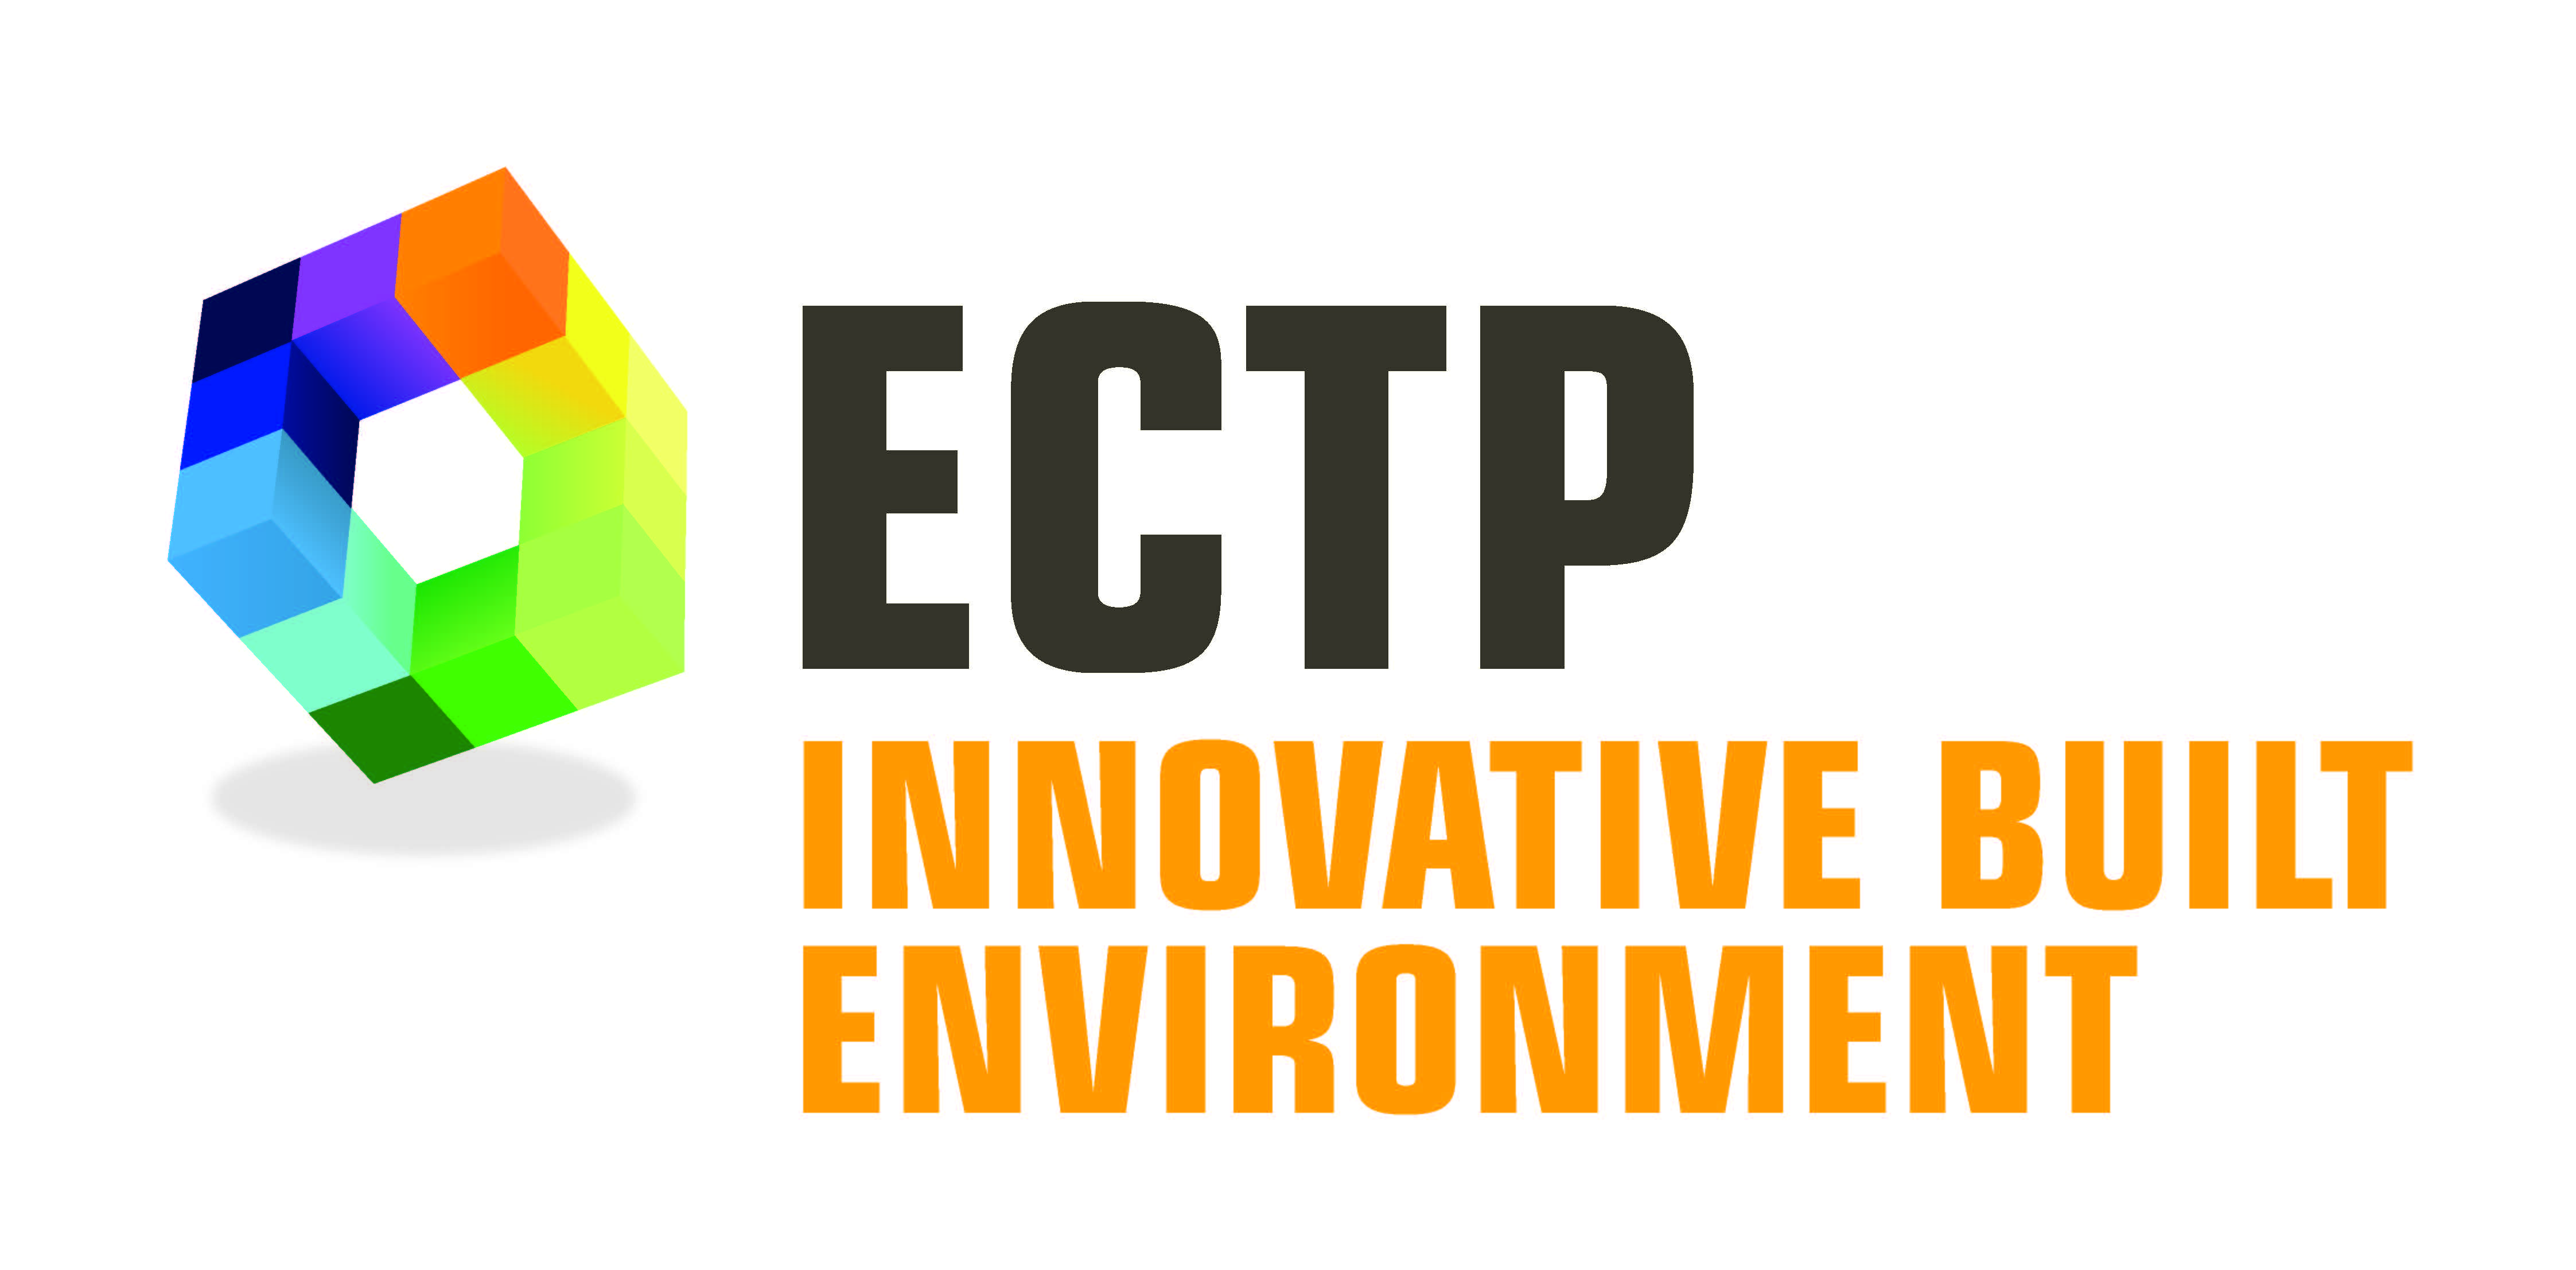 ECTP Conference